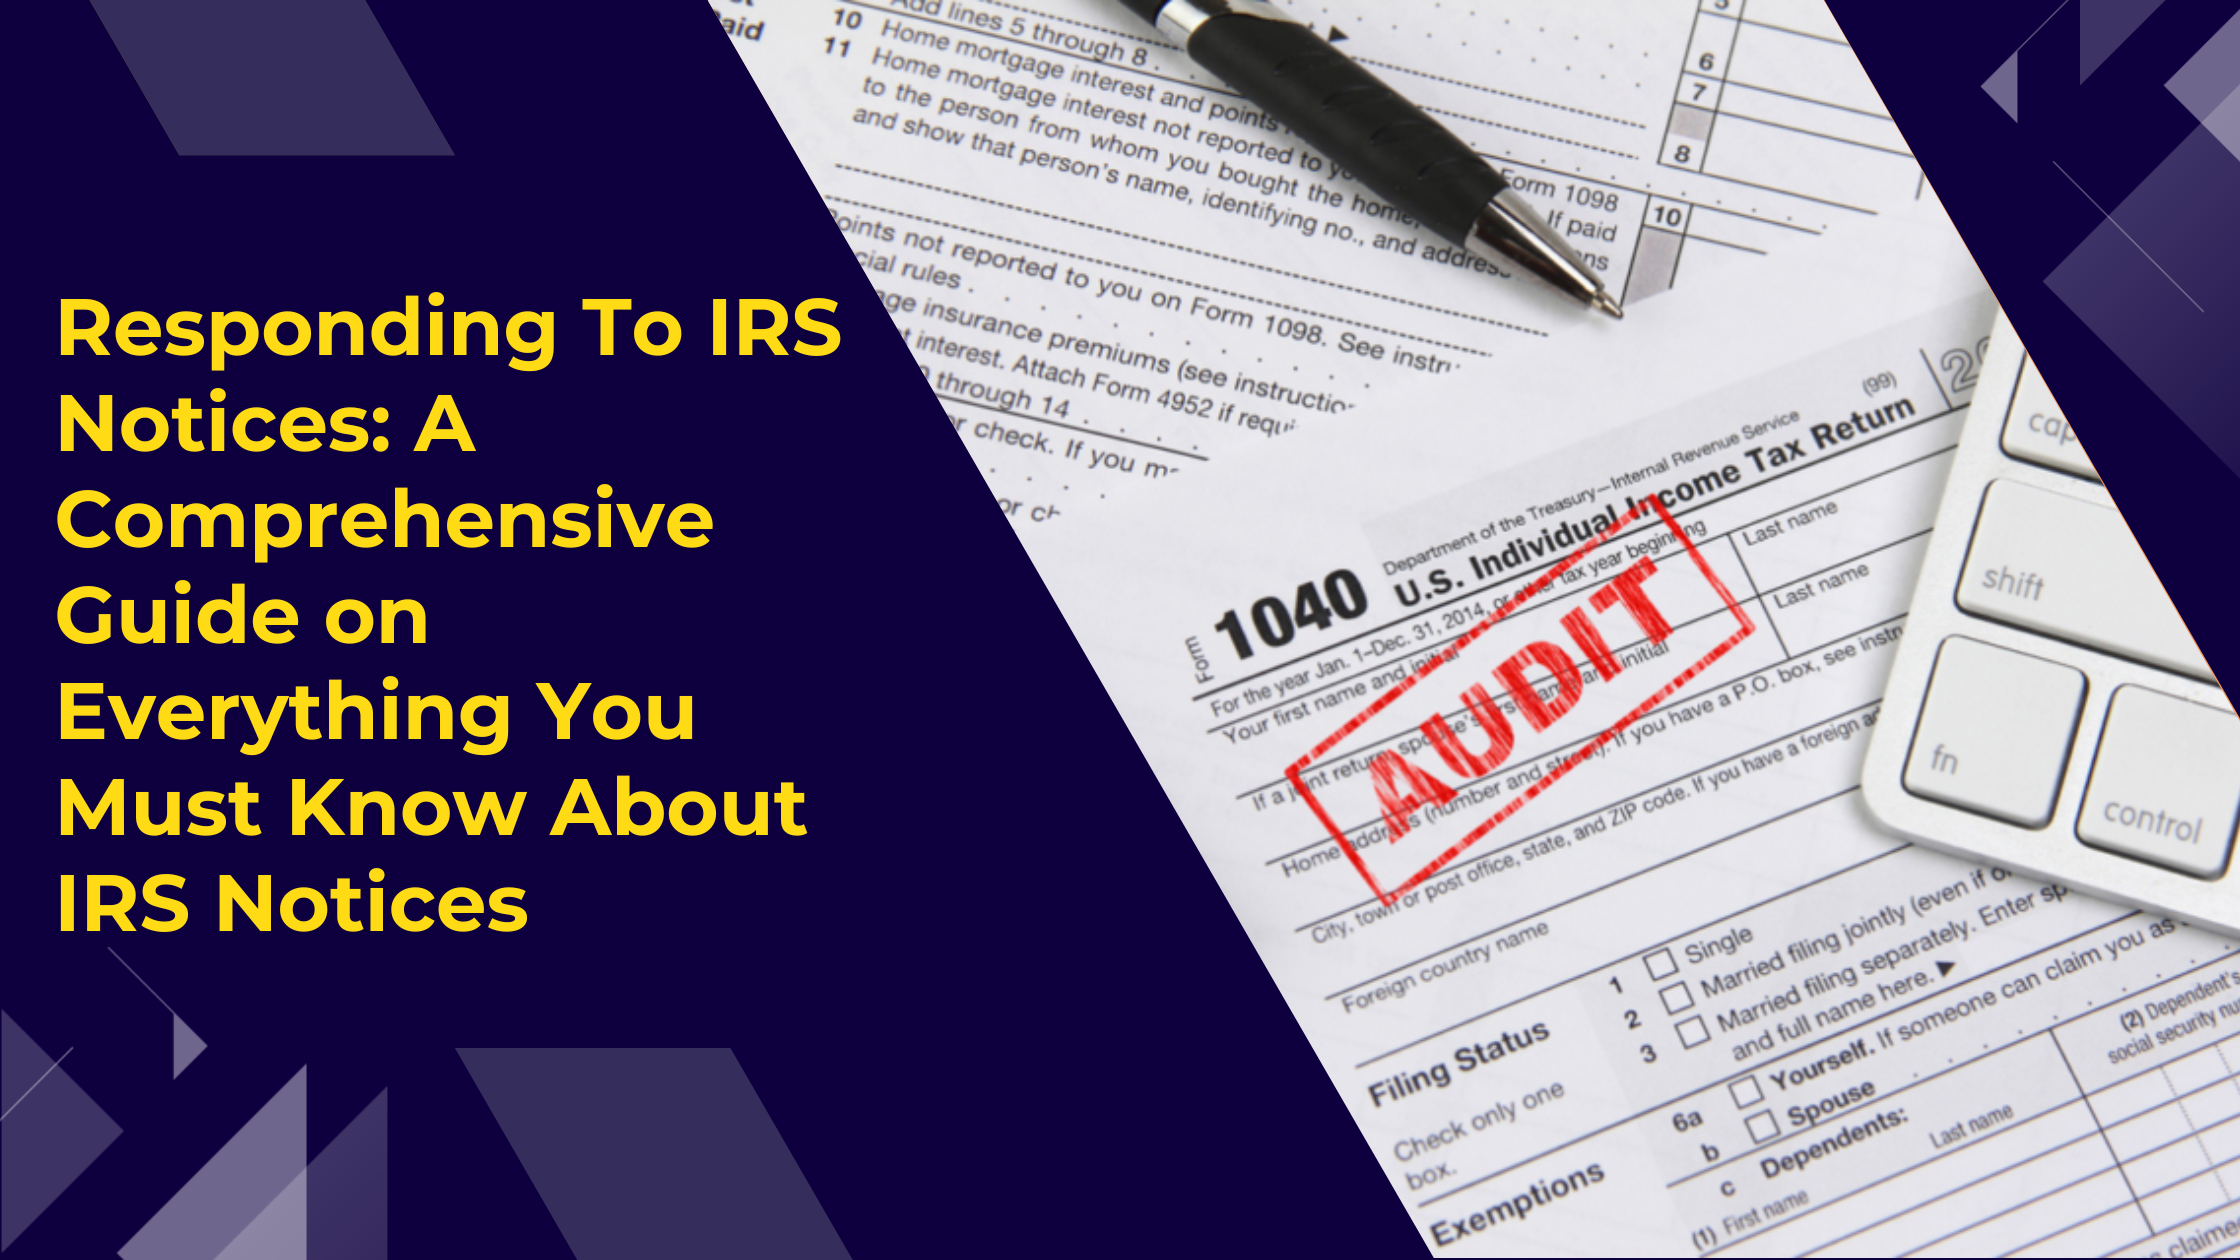 Responding To IRS Notices: A Comprehensive Guide on Everything You Must Know About IRS Notices 